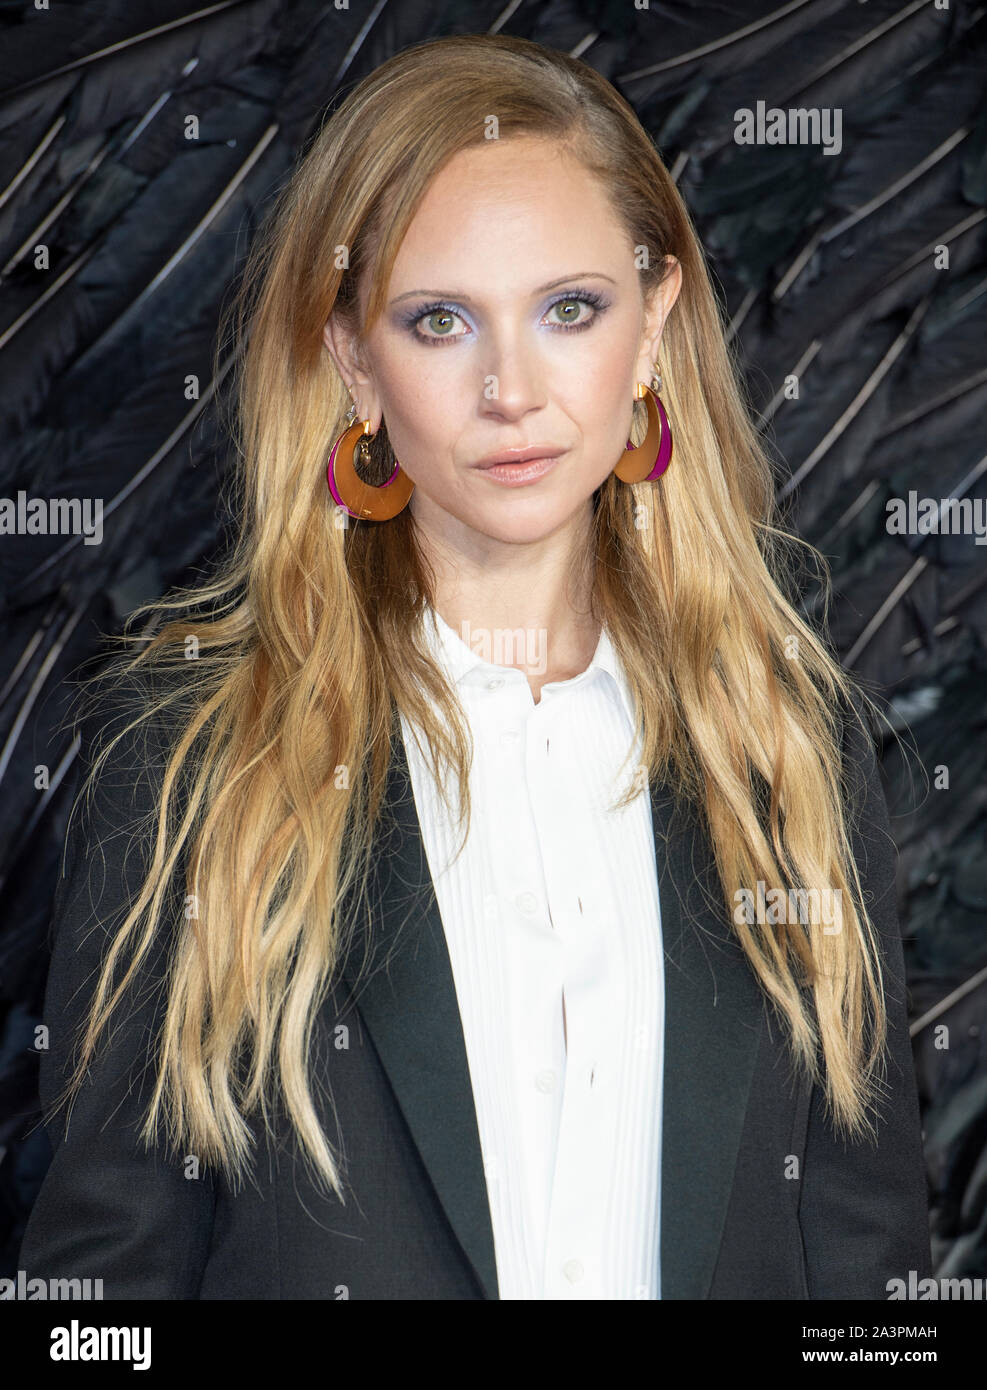 LONDON - ENGLAND - OCT 9. Juno Temple attends the ‘Maleficent: Mistress of Evil’ European Premiere at the BFI Imax, Waterloo, London, England on the 9th October 2019. Gary Mitchell/Alamy Live News Stock Photo